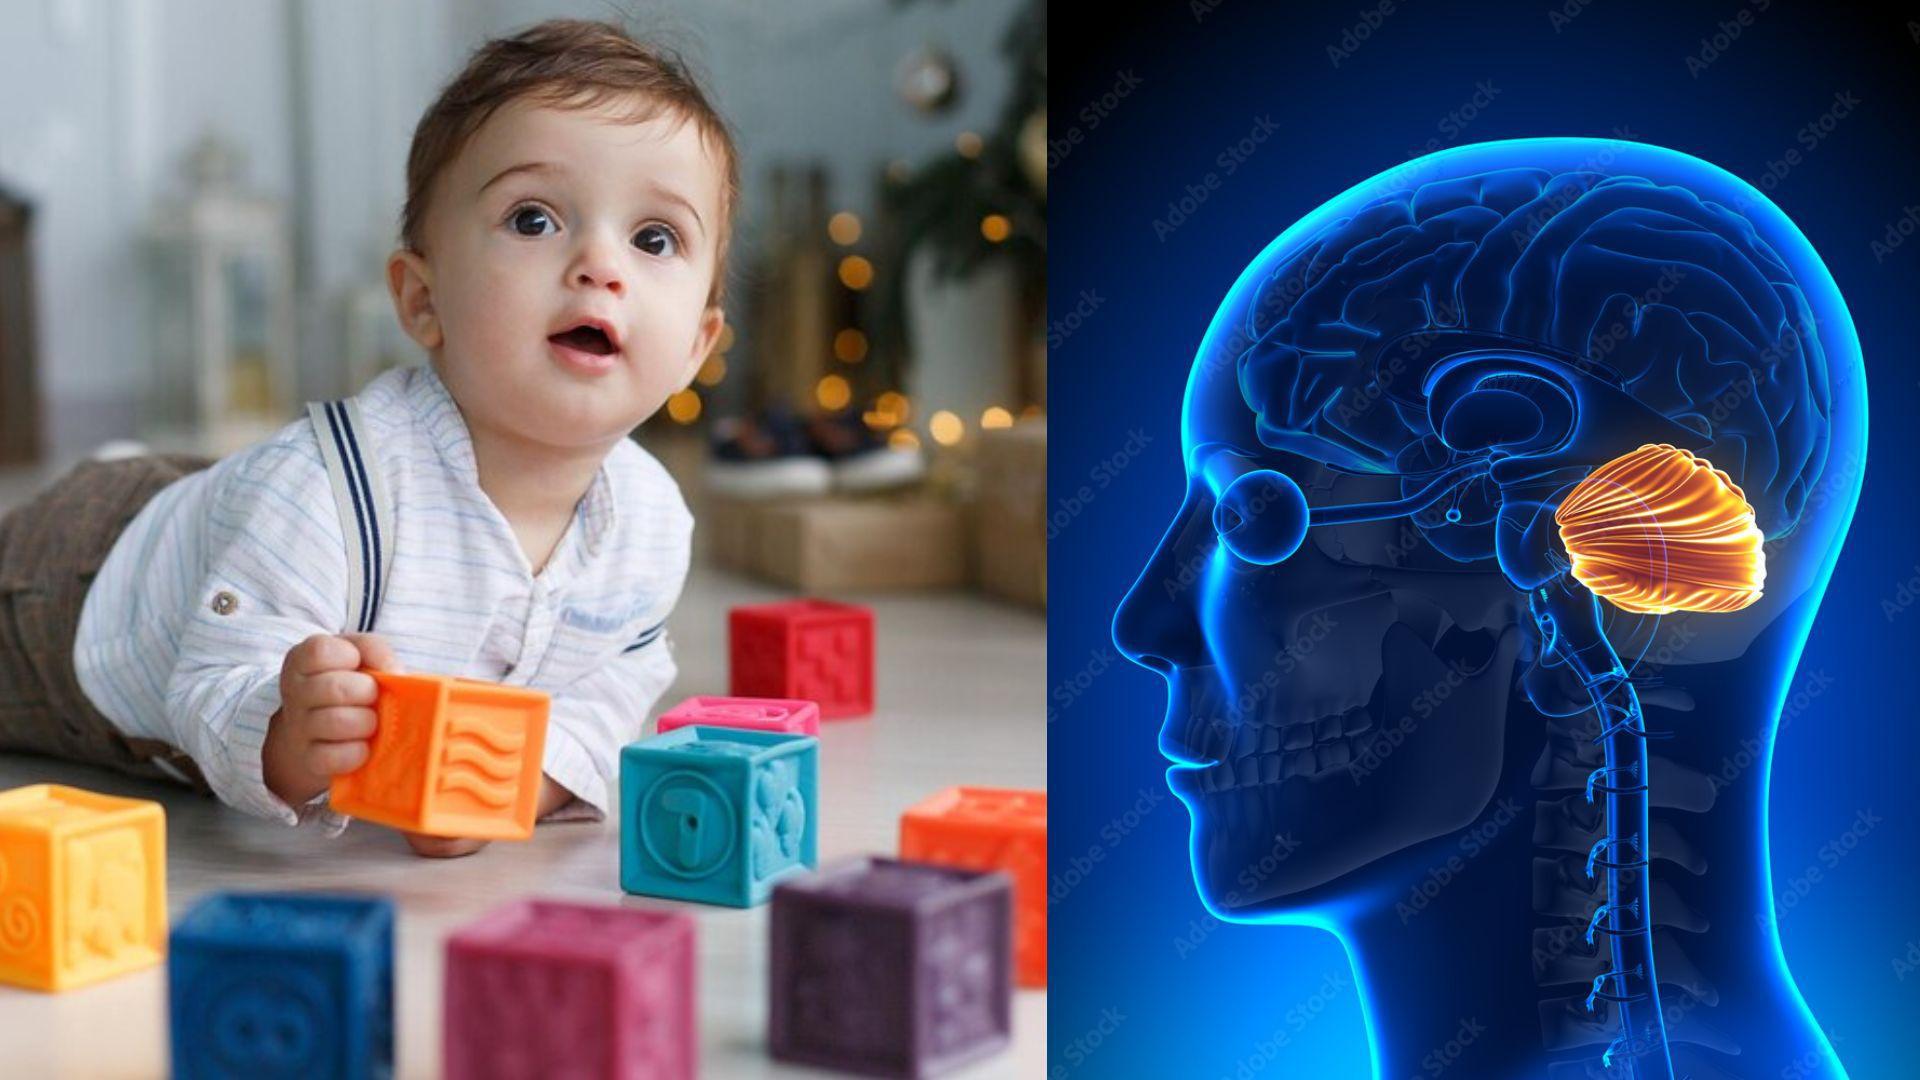 Toddler playing with blocks/Cerebellum in the brain